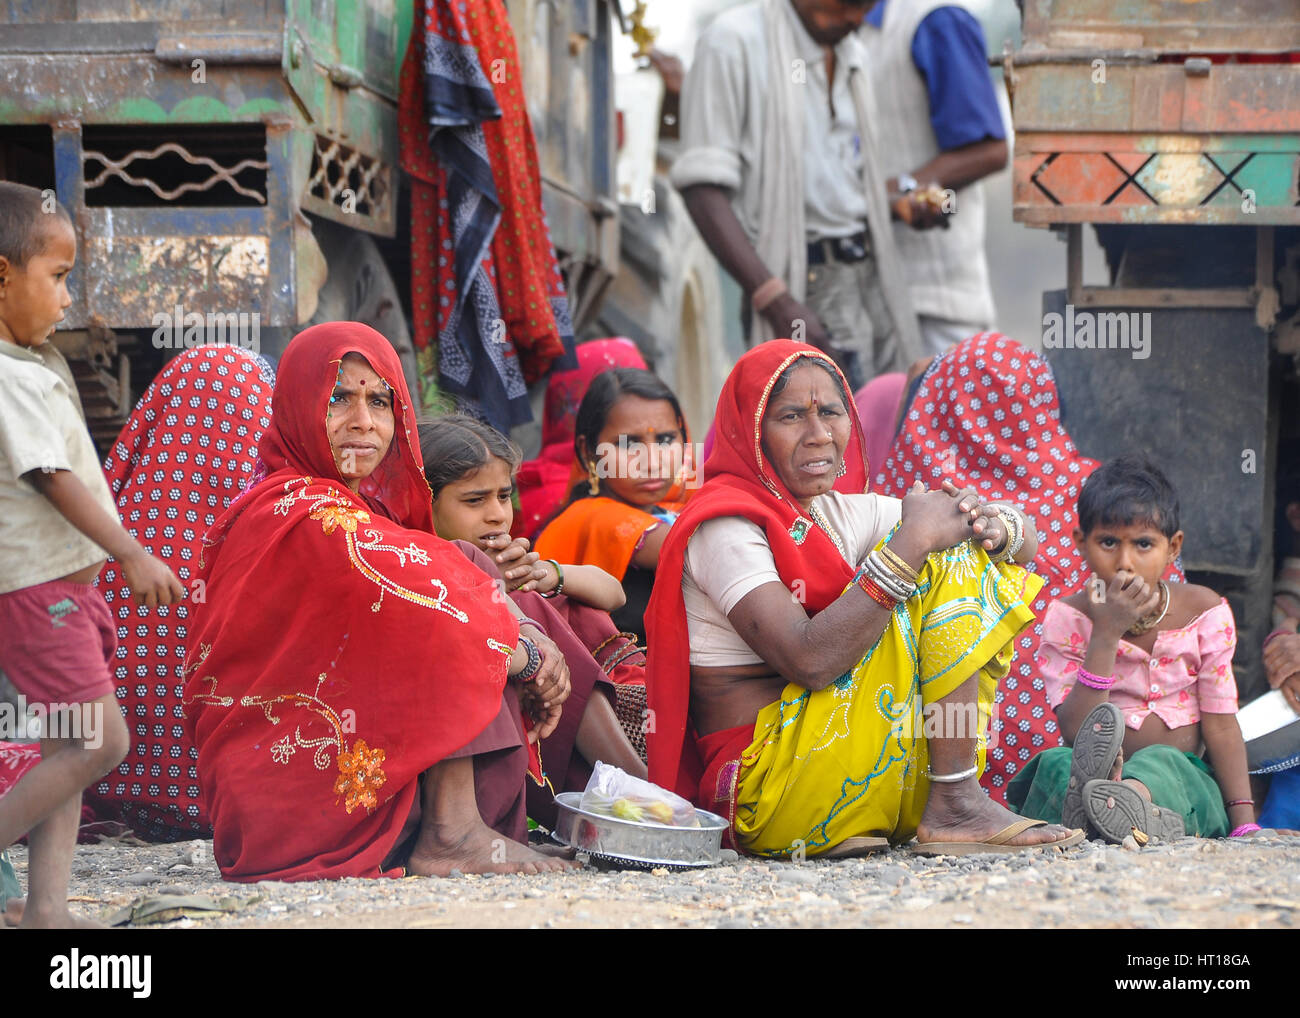 A group of Rajasthani women and children from the Bhil Tribe Stock Photo